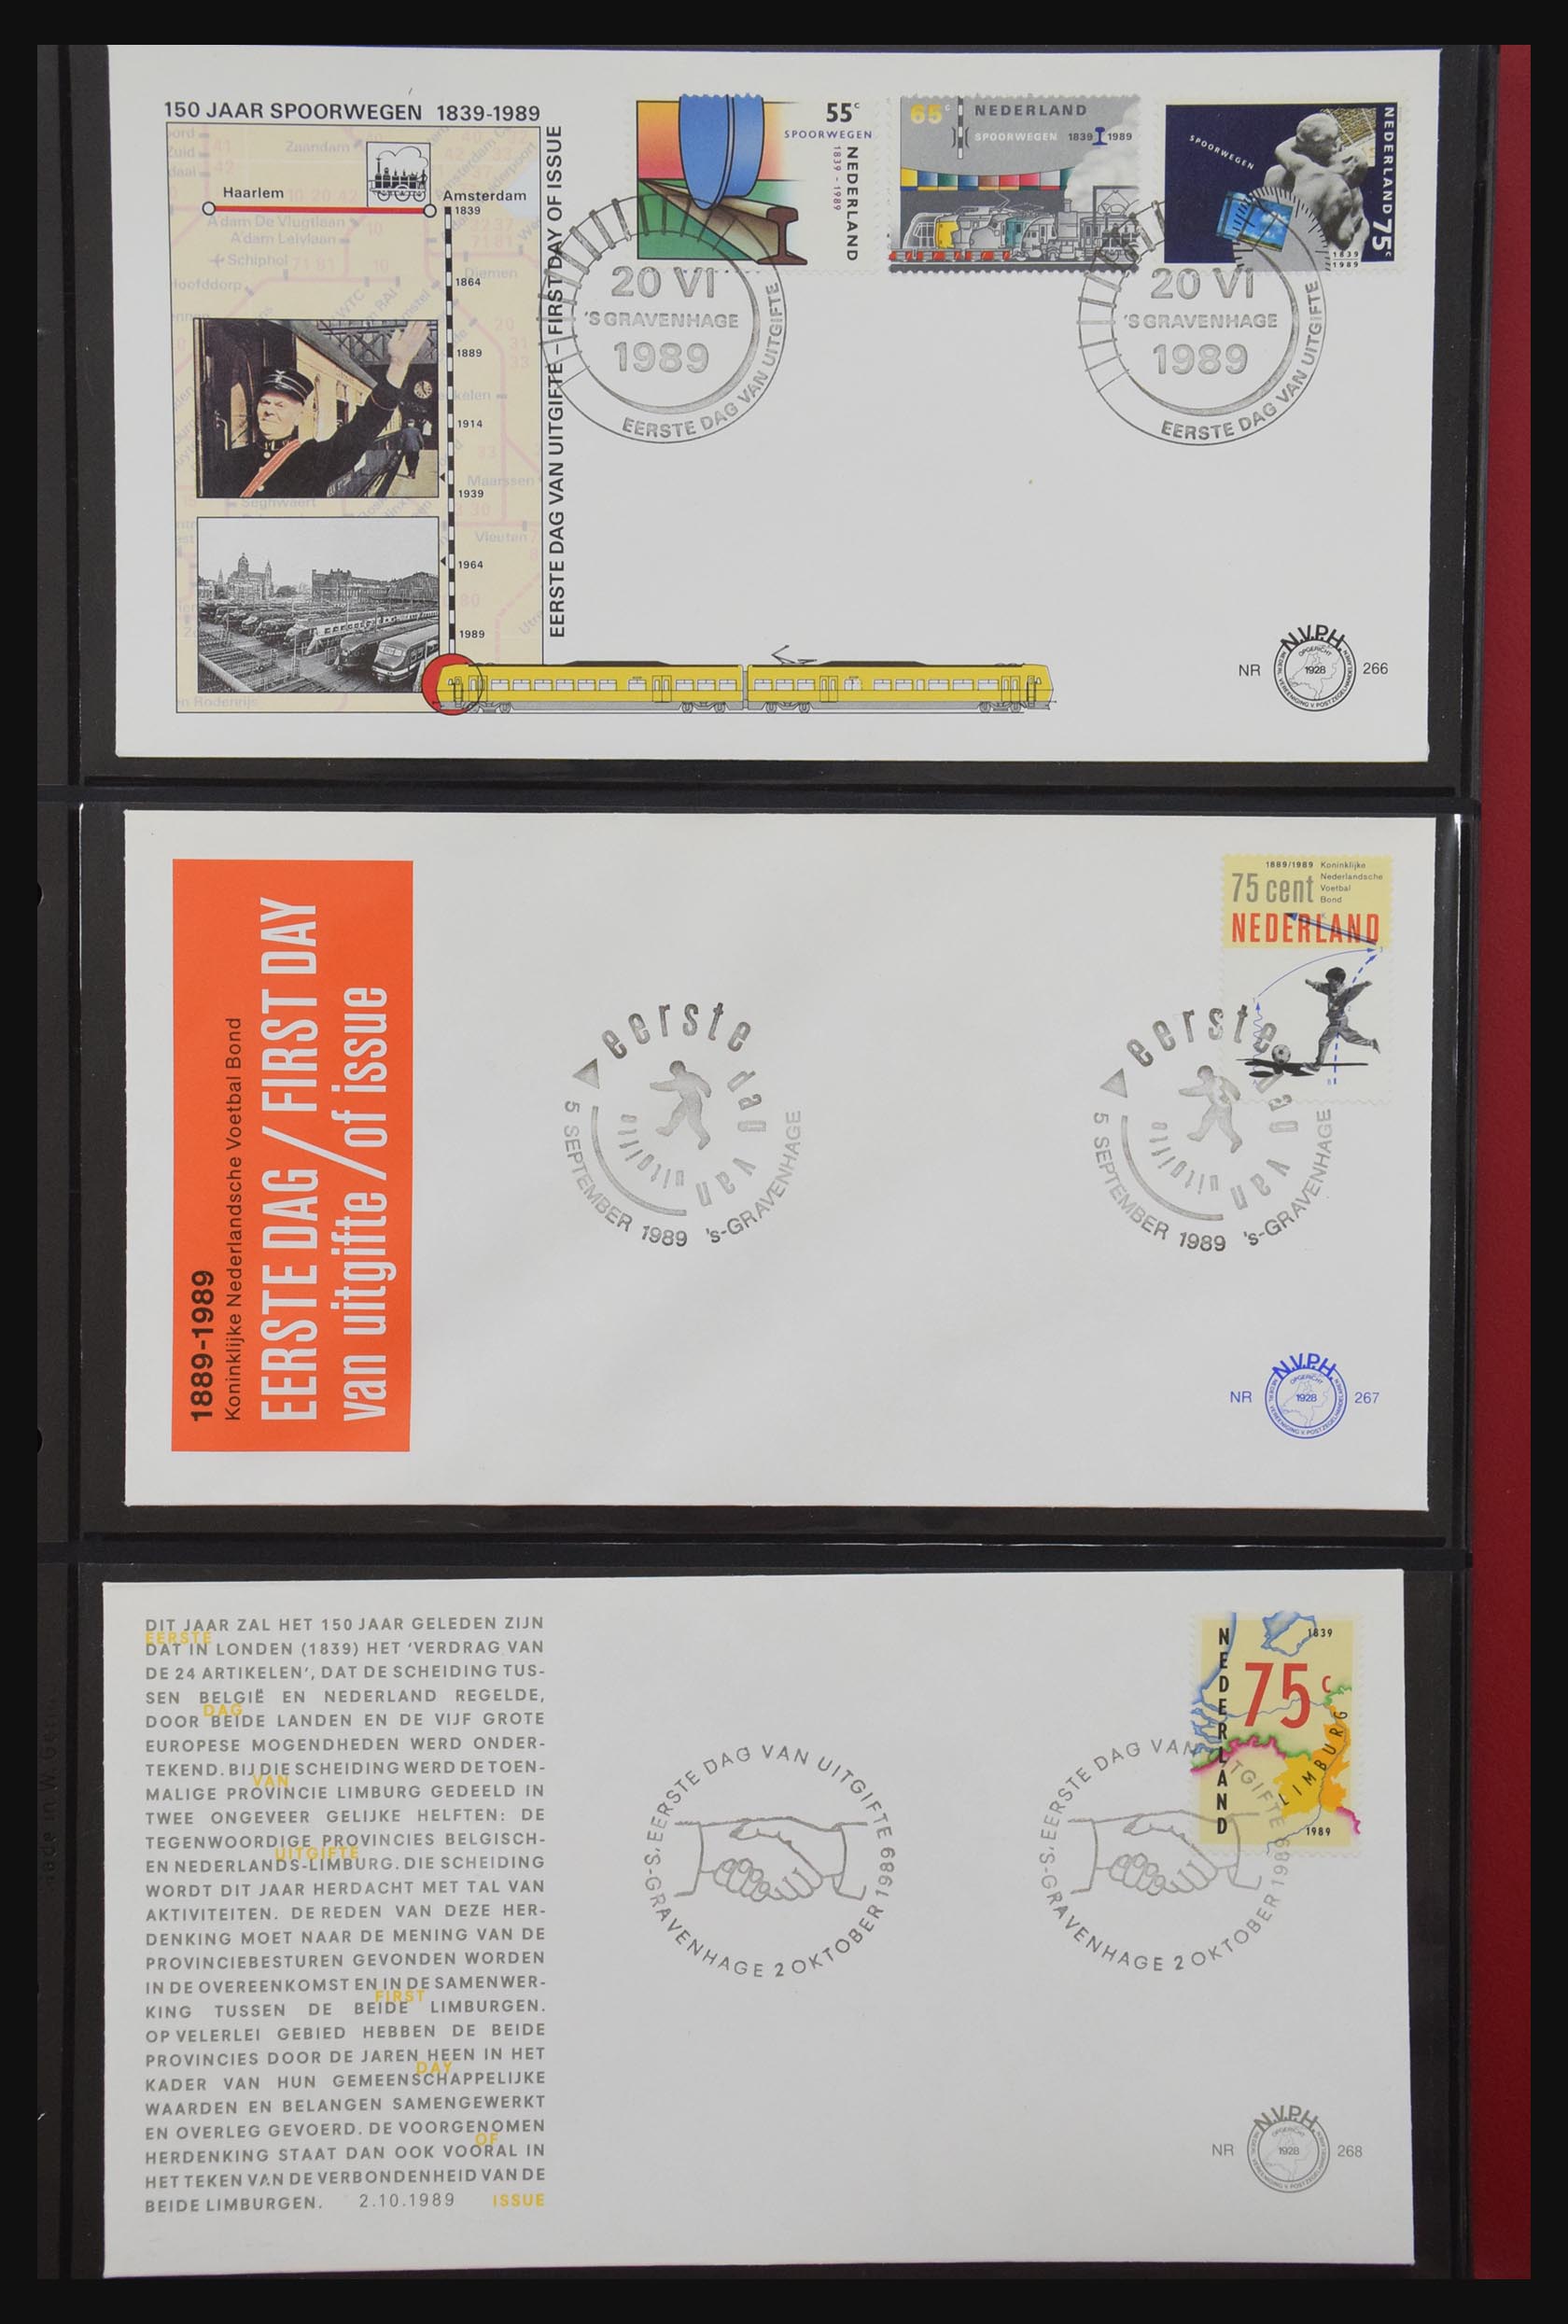 31098 099 - 31098 Netherlands FDC's 1950-2015.